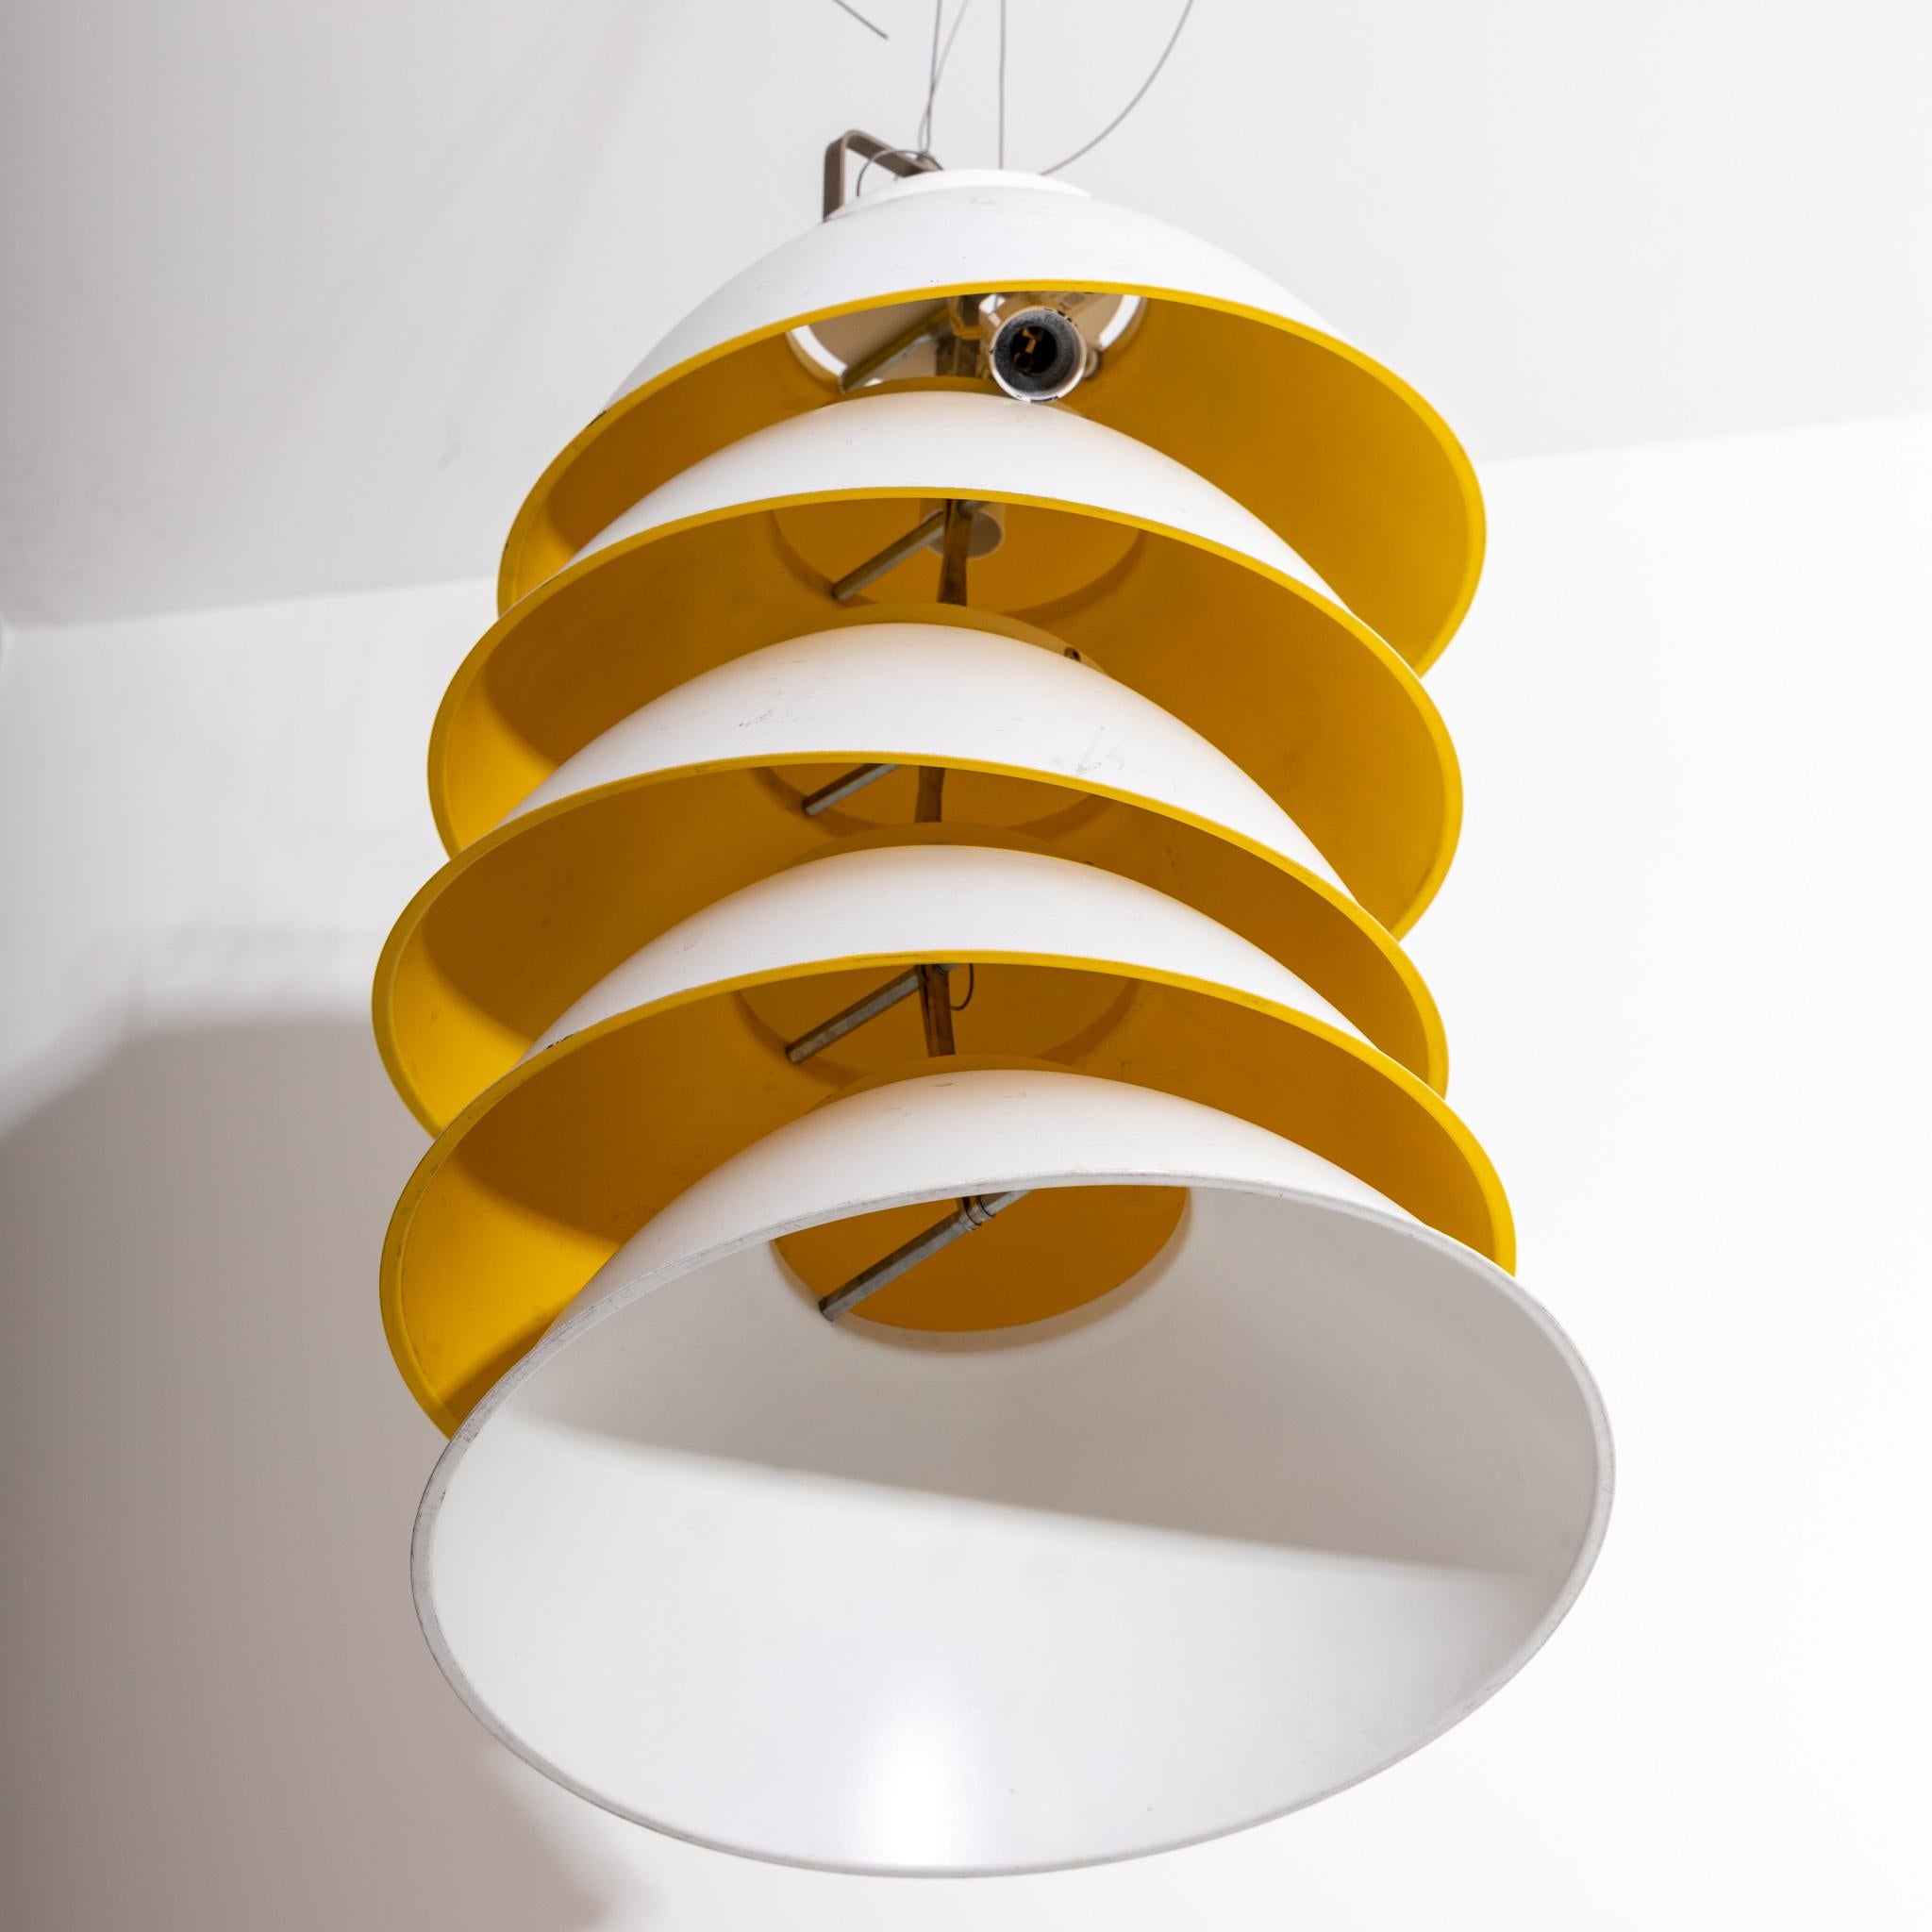 Pendant lamp with five white lampshades and yellow inner side, which can be adjusted in height. Designed in 2007 by Axel Schmidt for Ingo Maurer.